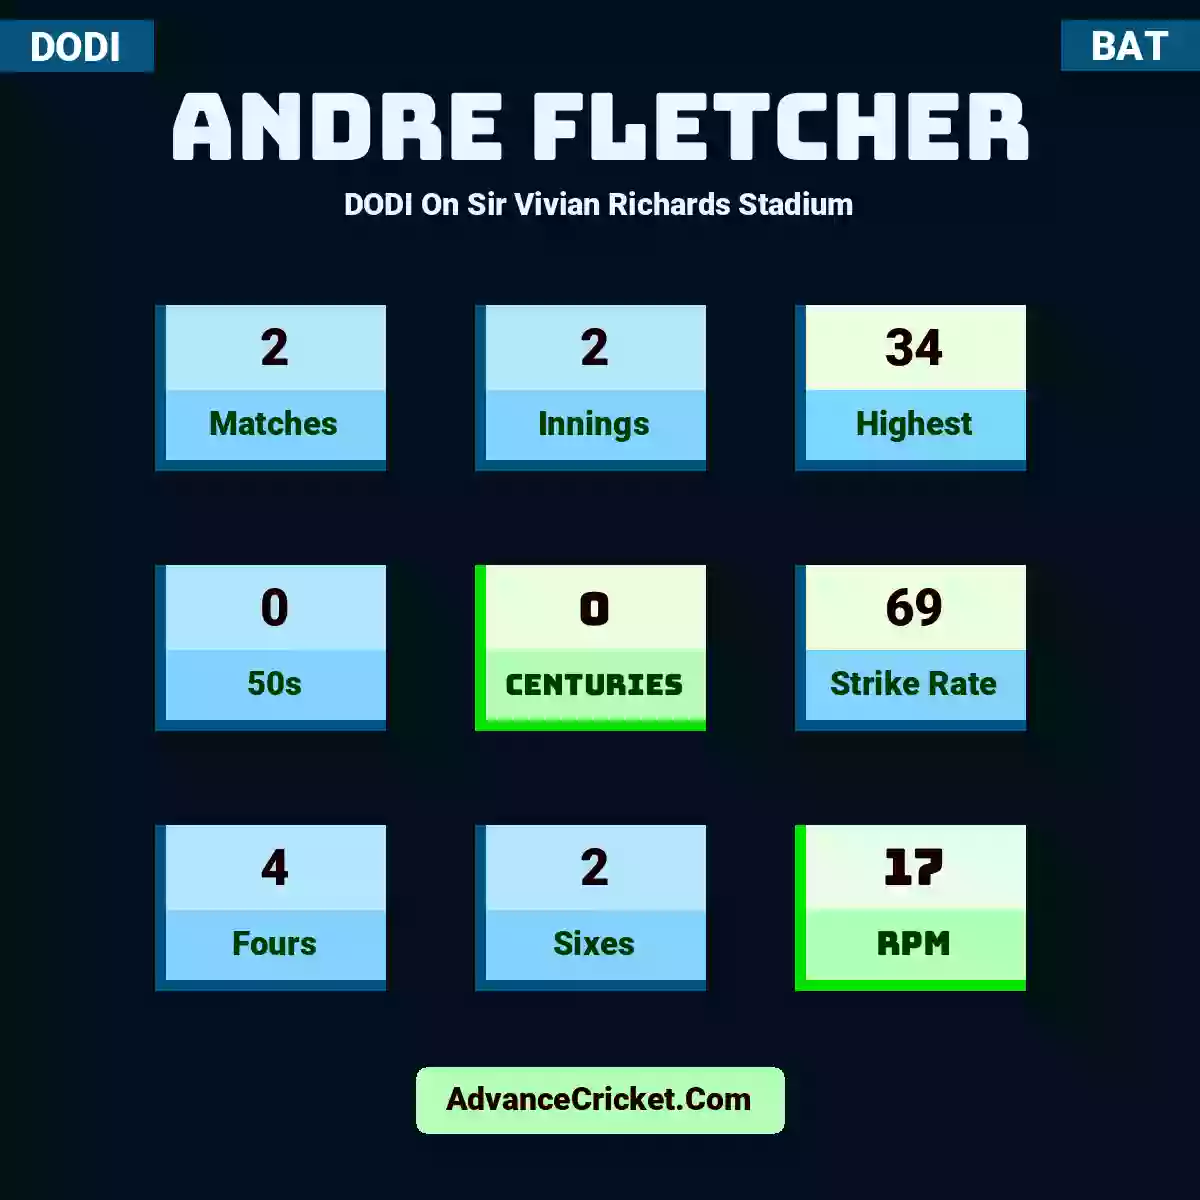 Andre Fletcher DODI  On Sir Vivian Richards Stadium, Andre Fletcher played 2 matches, scored 34 runs as highest, 0 half-centuries, and 0 centuries, with a strike rate of 69. A.Fletcher hit 4 fours and 2 sixes, with an RPM of 17.